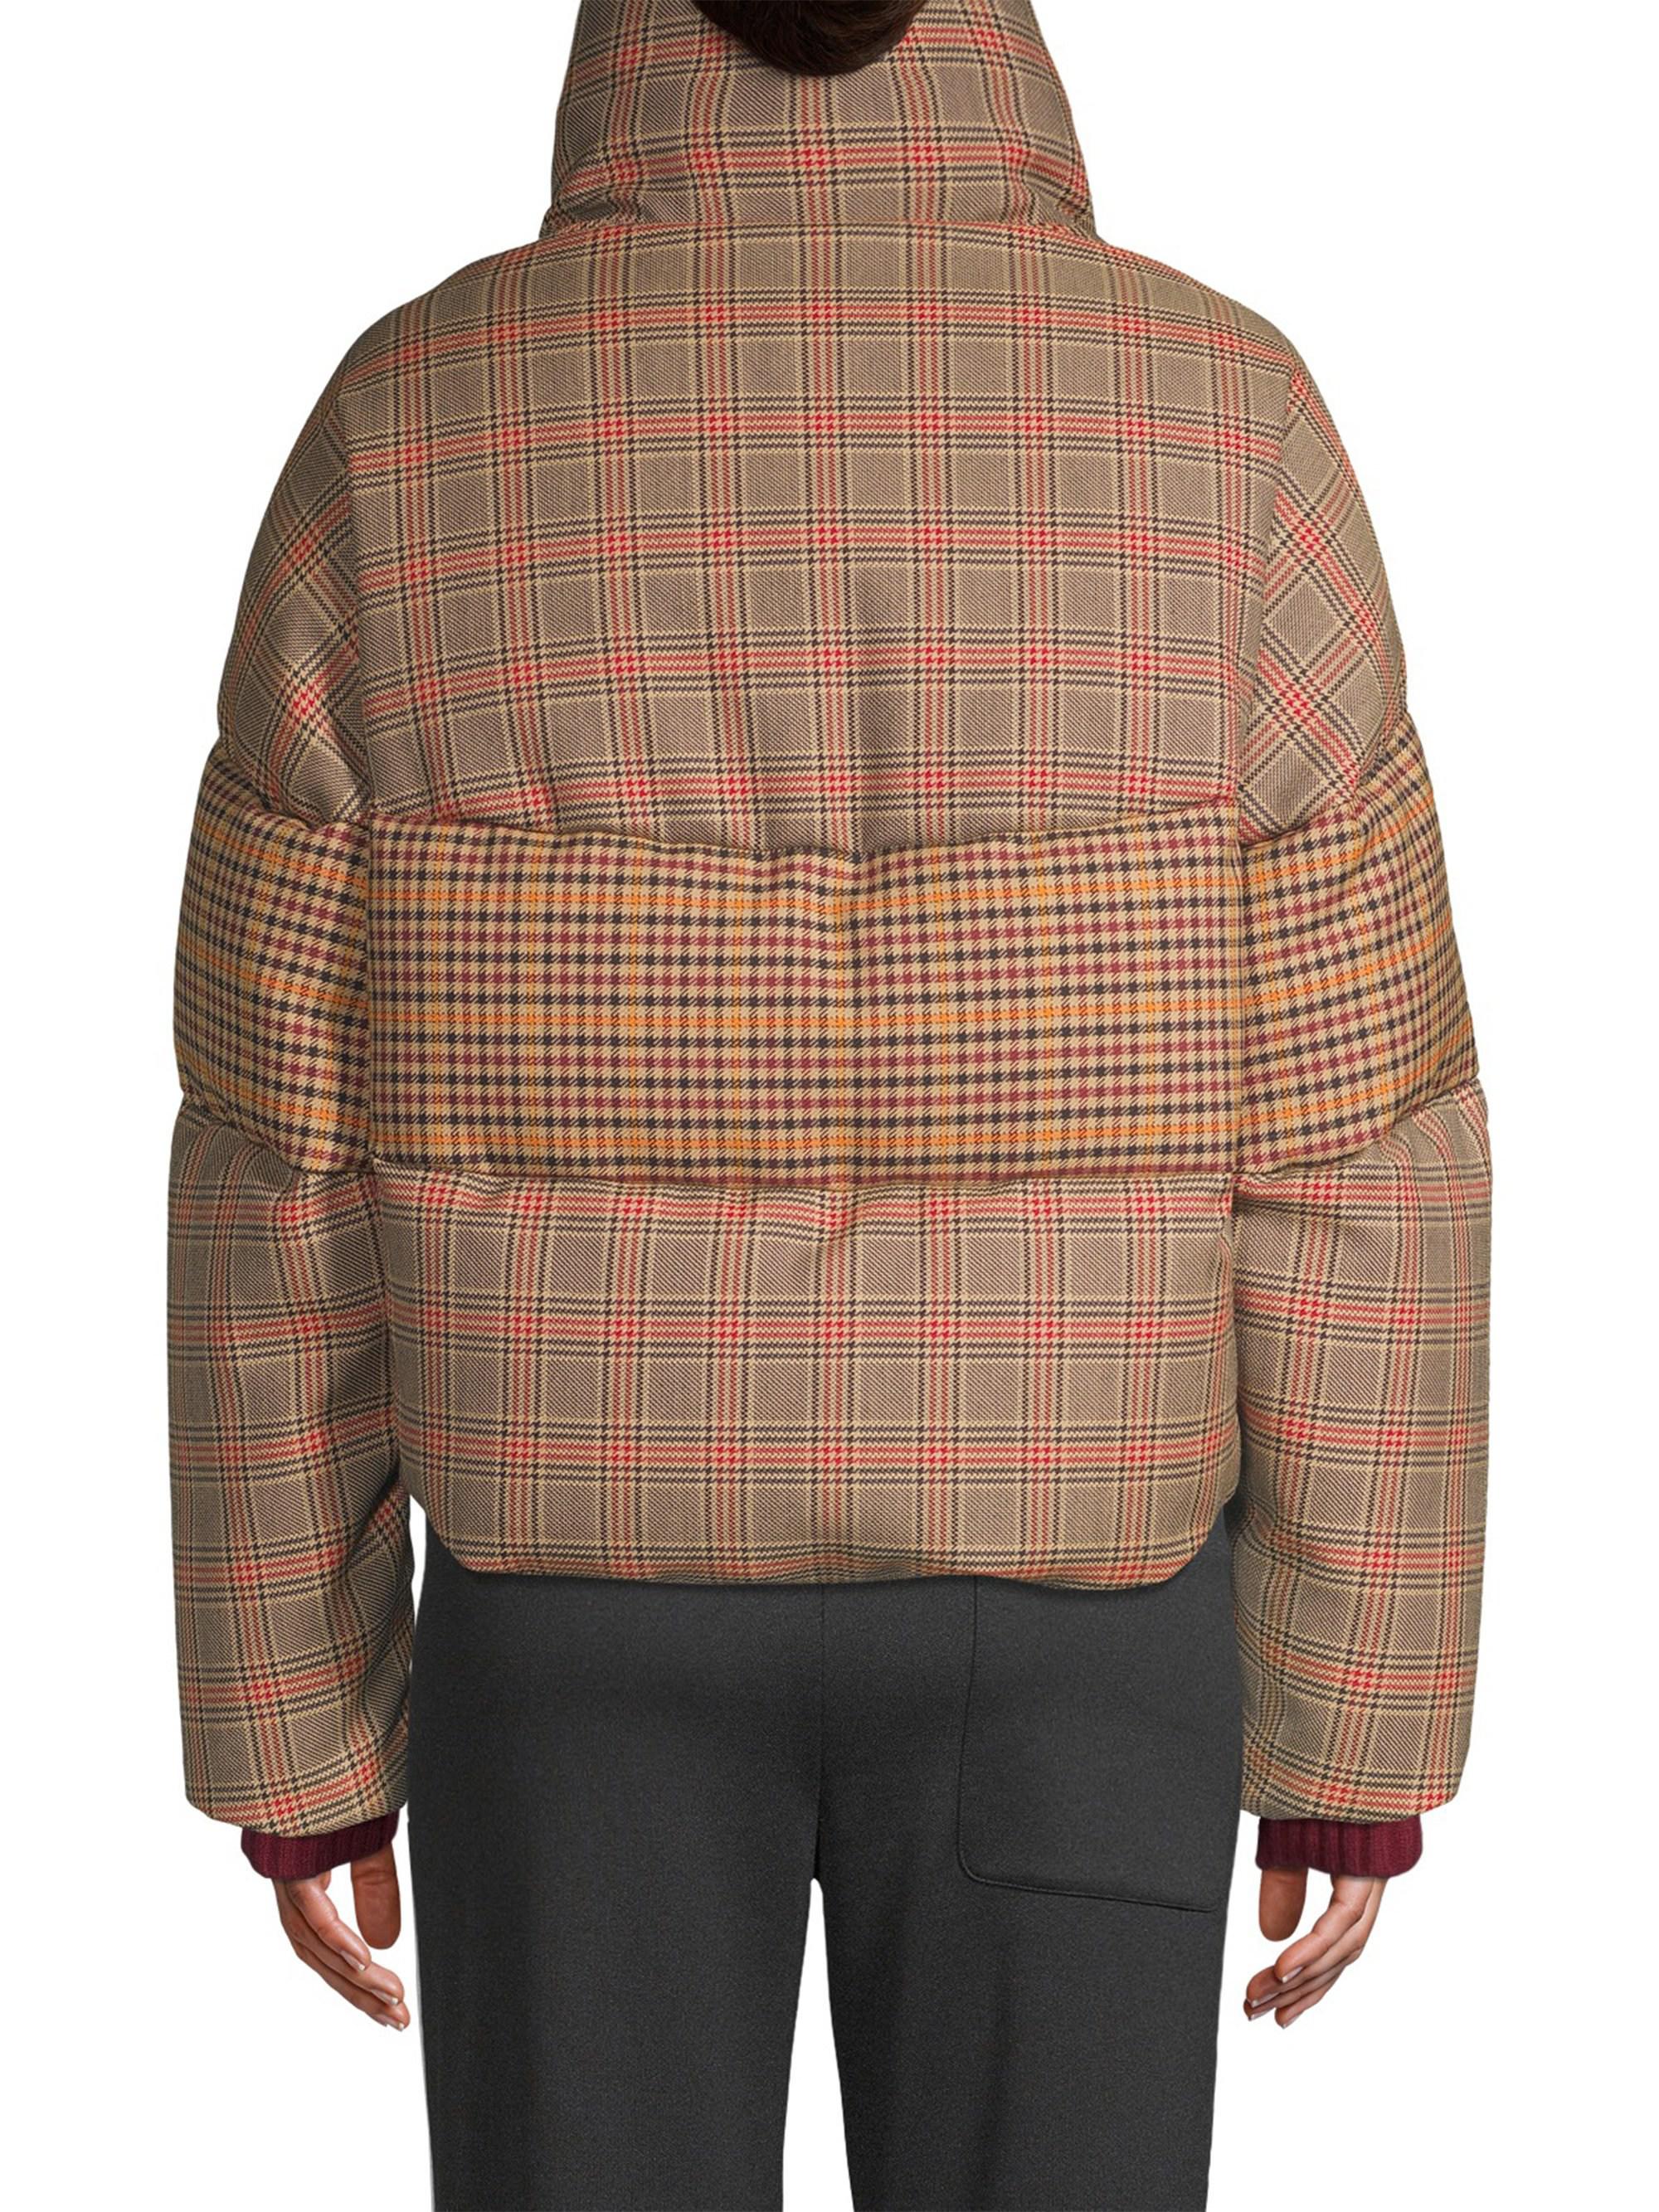 Moncler Synthetic Multi-plaid Puffer Jacket in Dark Red (Red) | Lyst